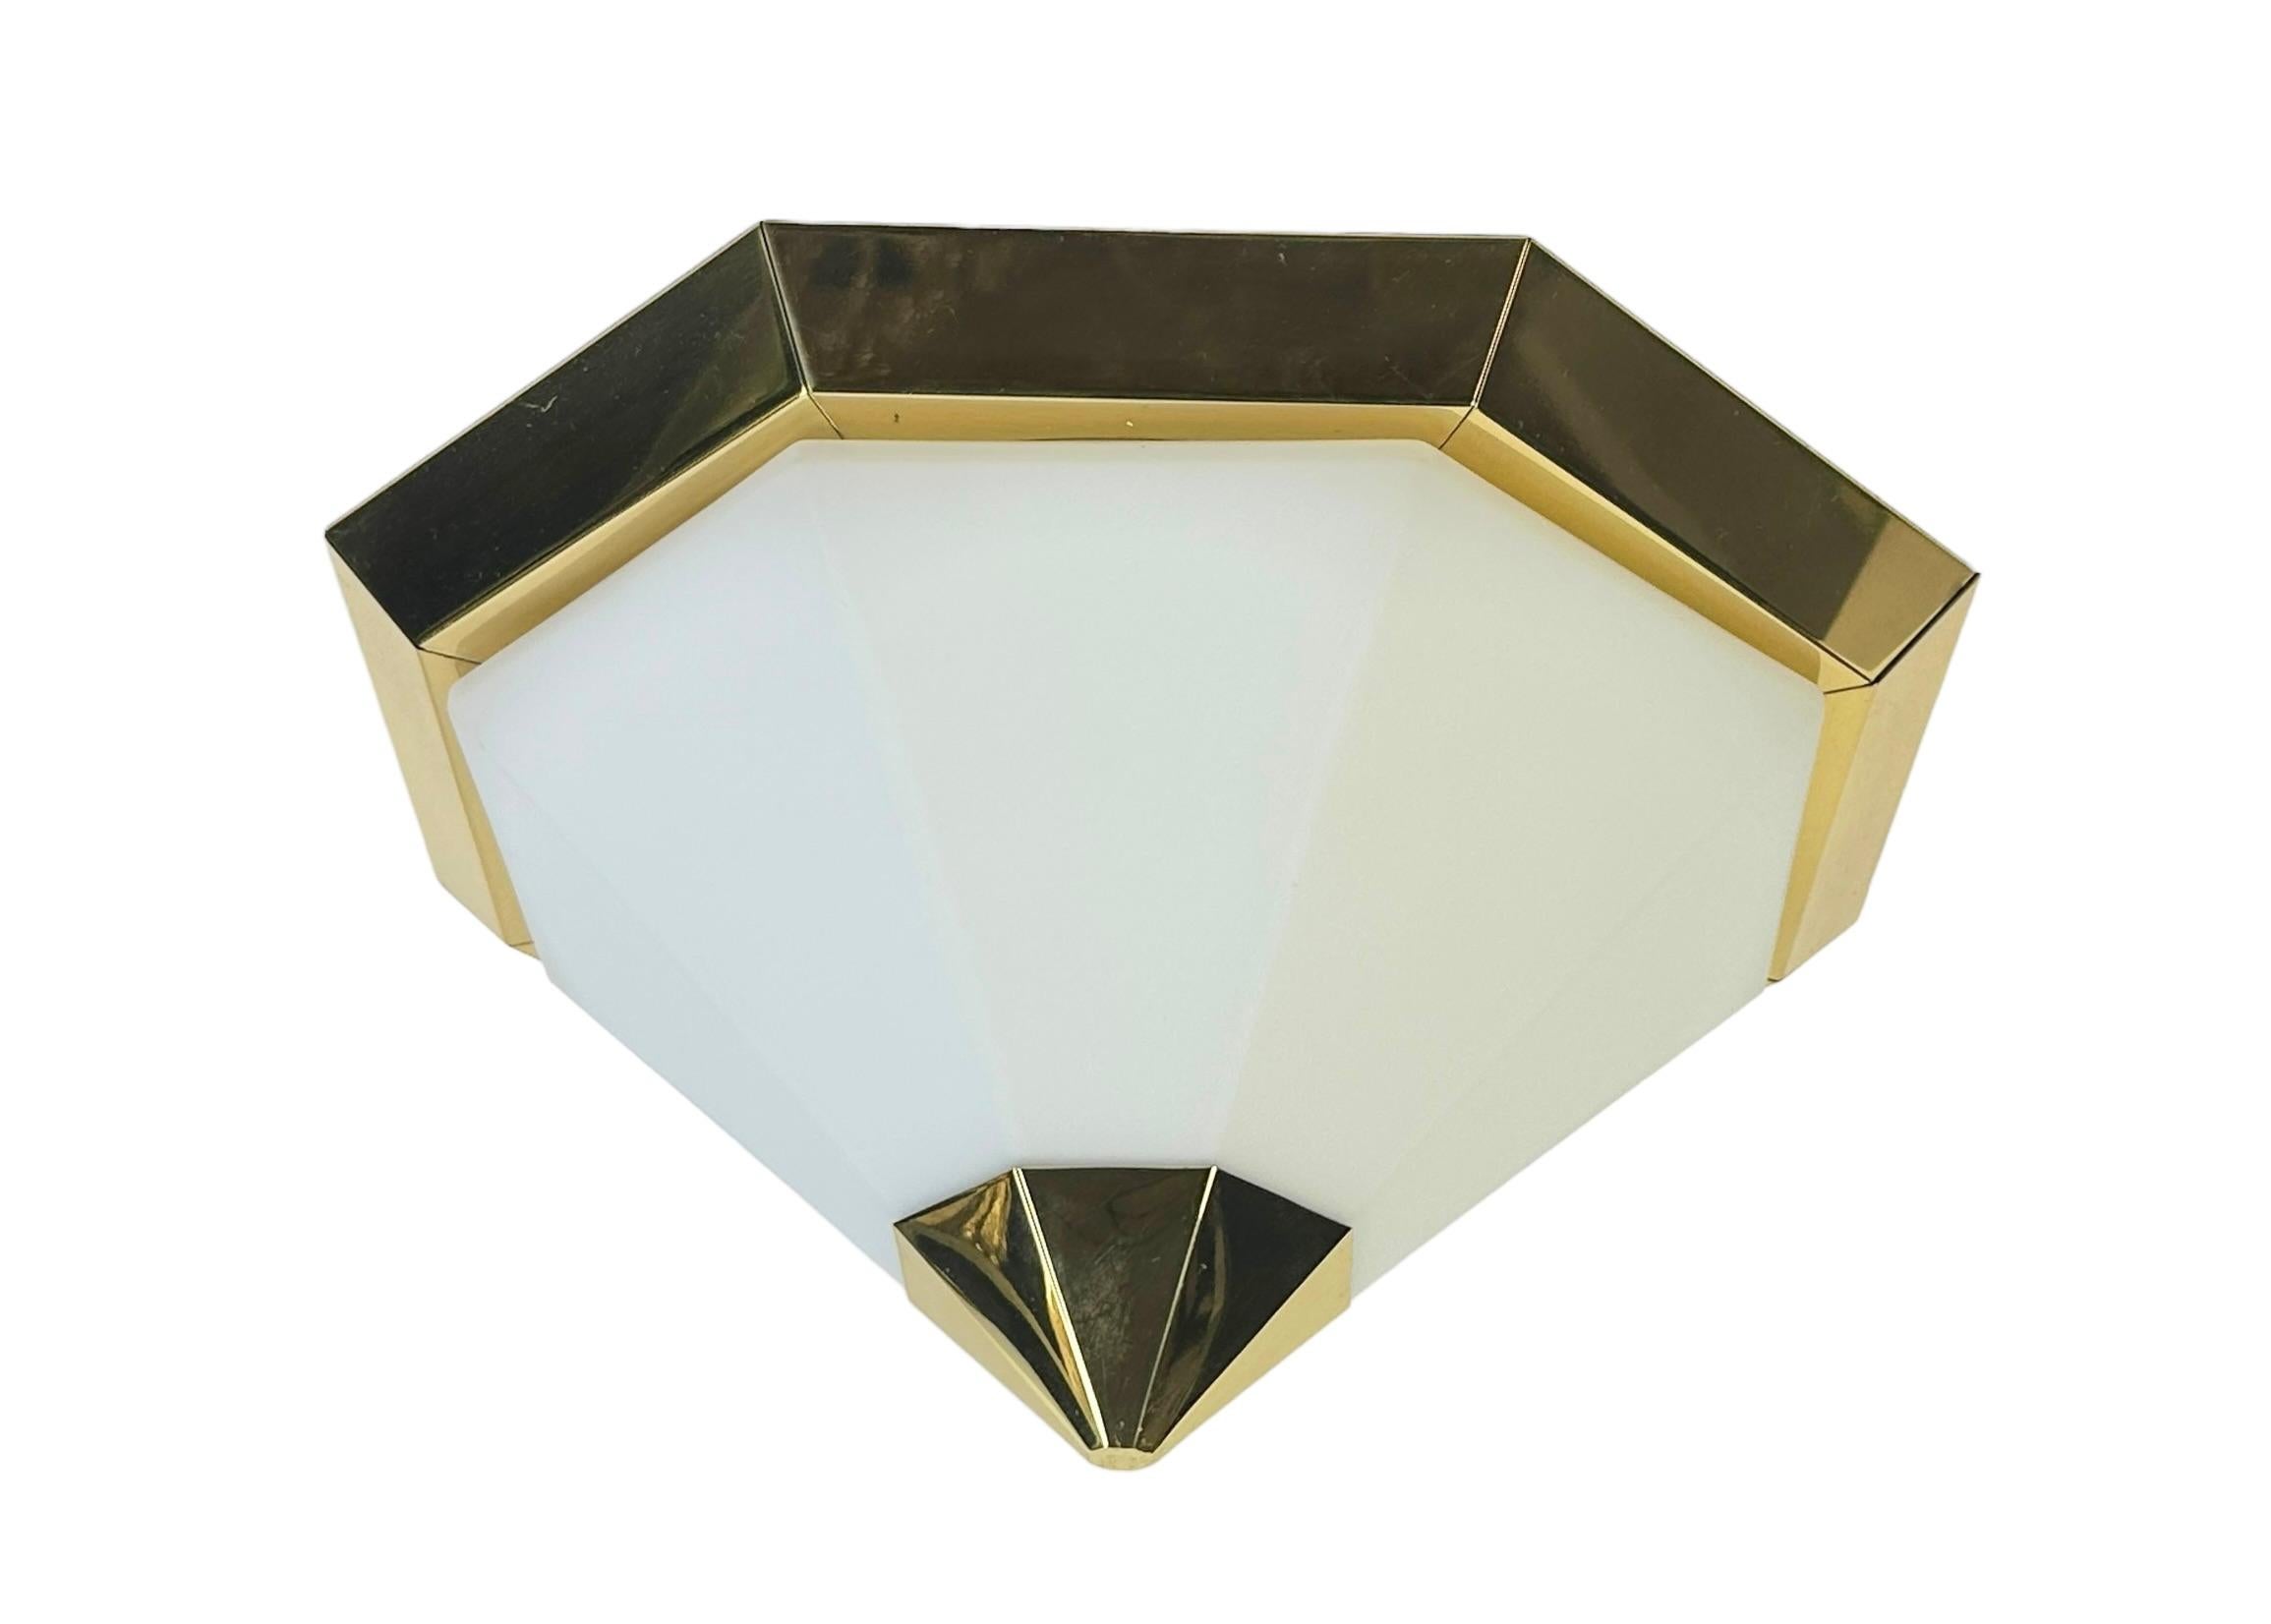 Petite pair of pyramid flush mount manufactured by Glashütte Limburg. They have a beautiful cone shape and are made of solid brass and opaline glass. The inside is made of metal. Each Fixture requires one European E27 / 110 Volt Edison bulb, each